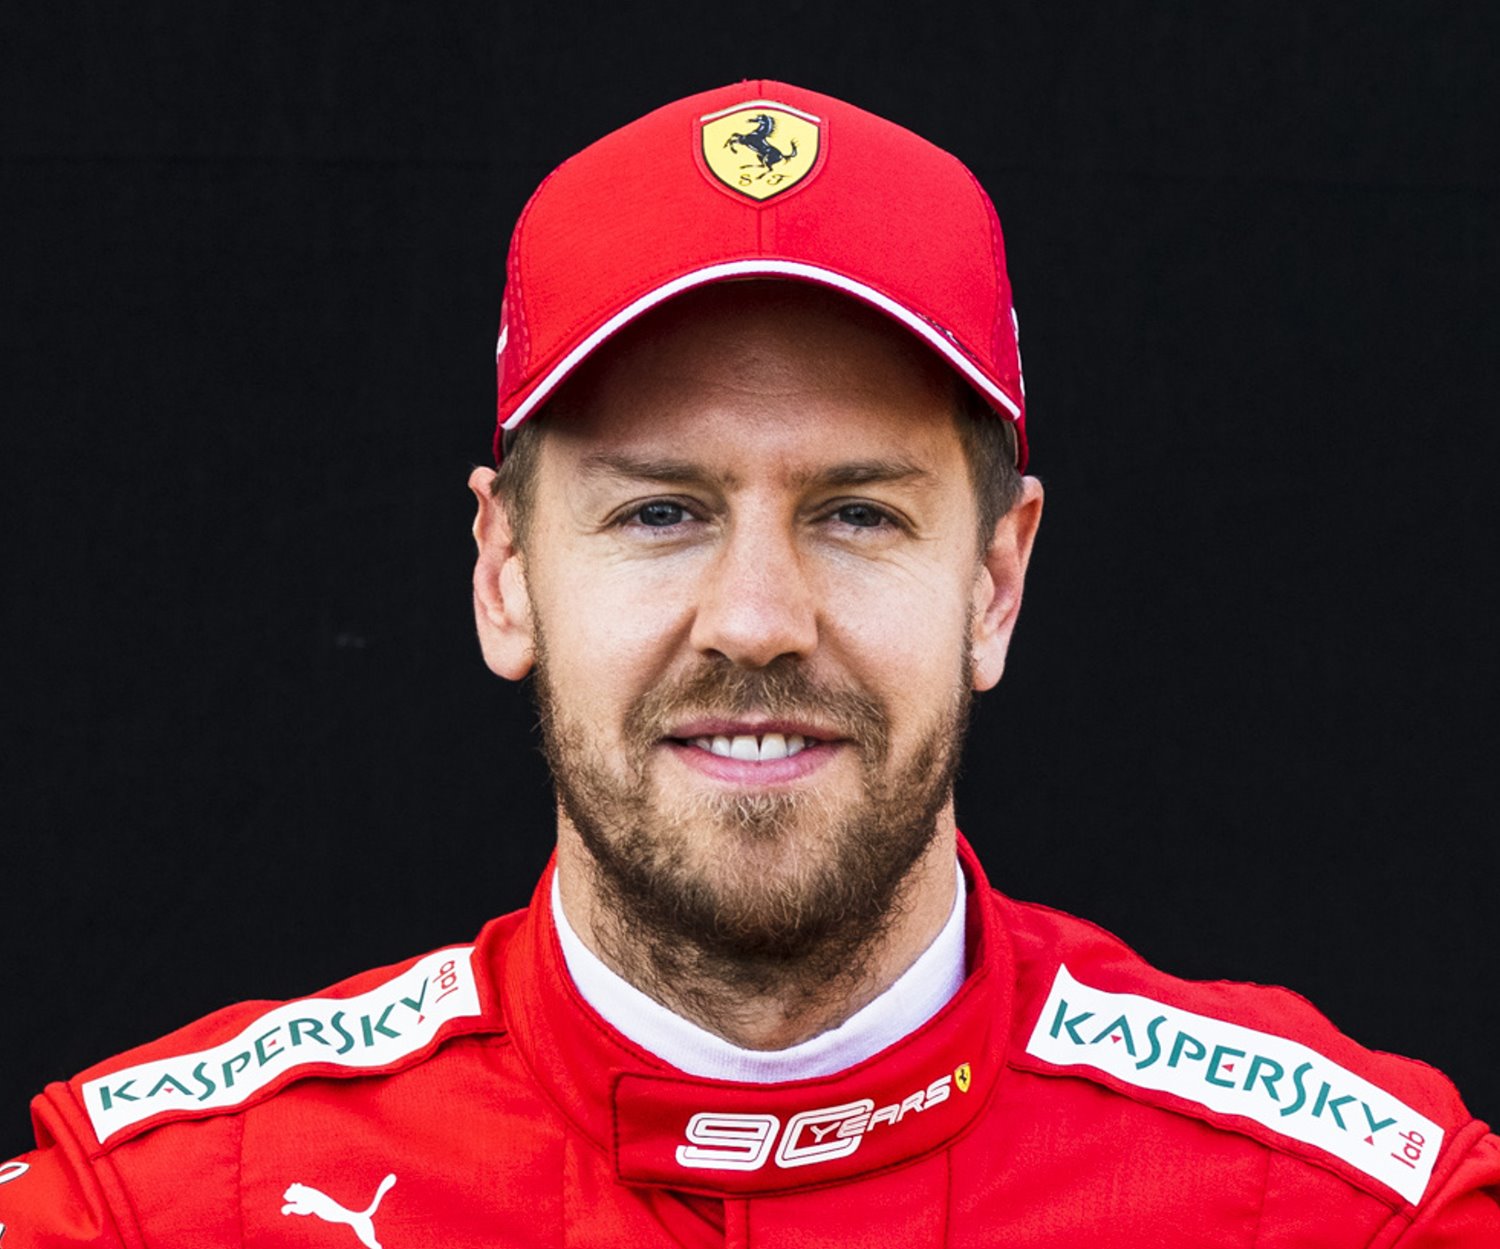 Another year of gaffes and Vettel will be toast